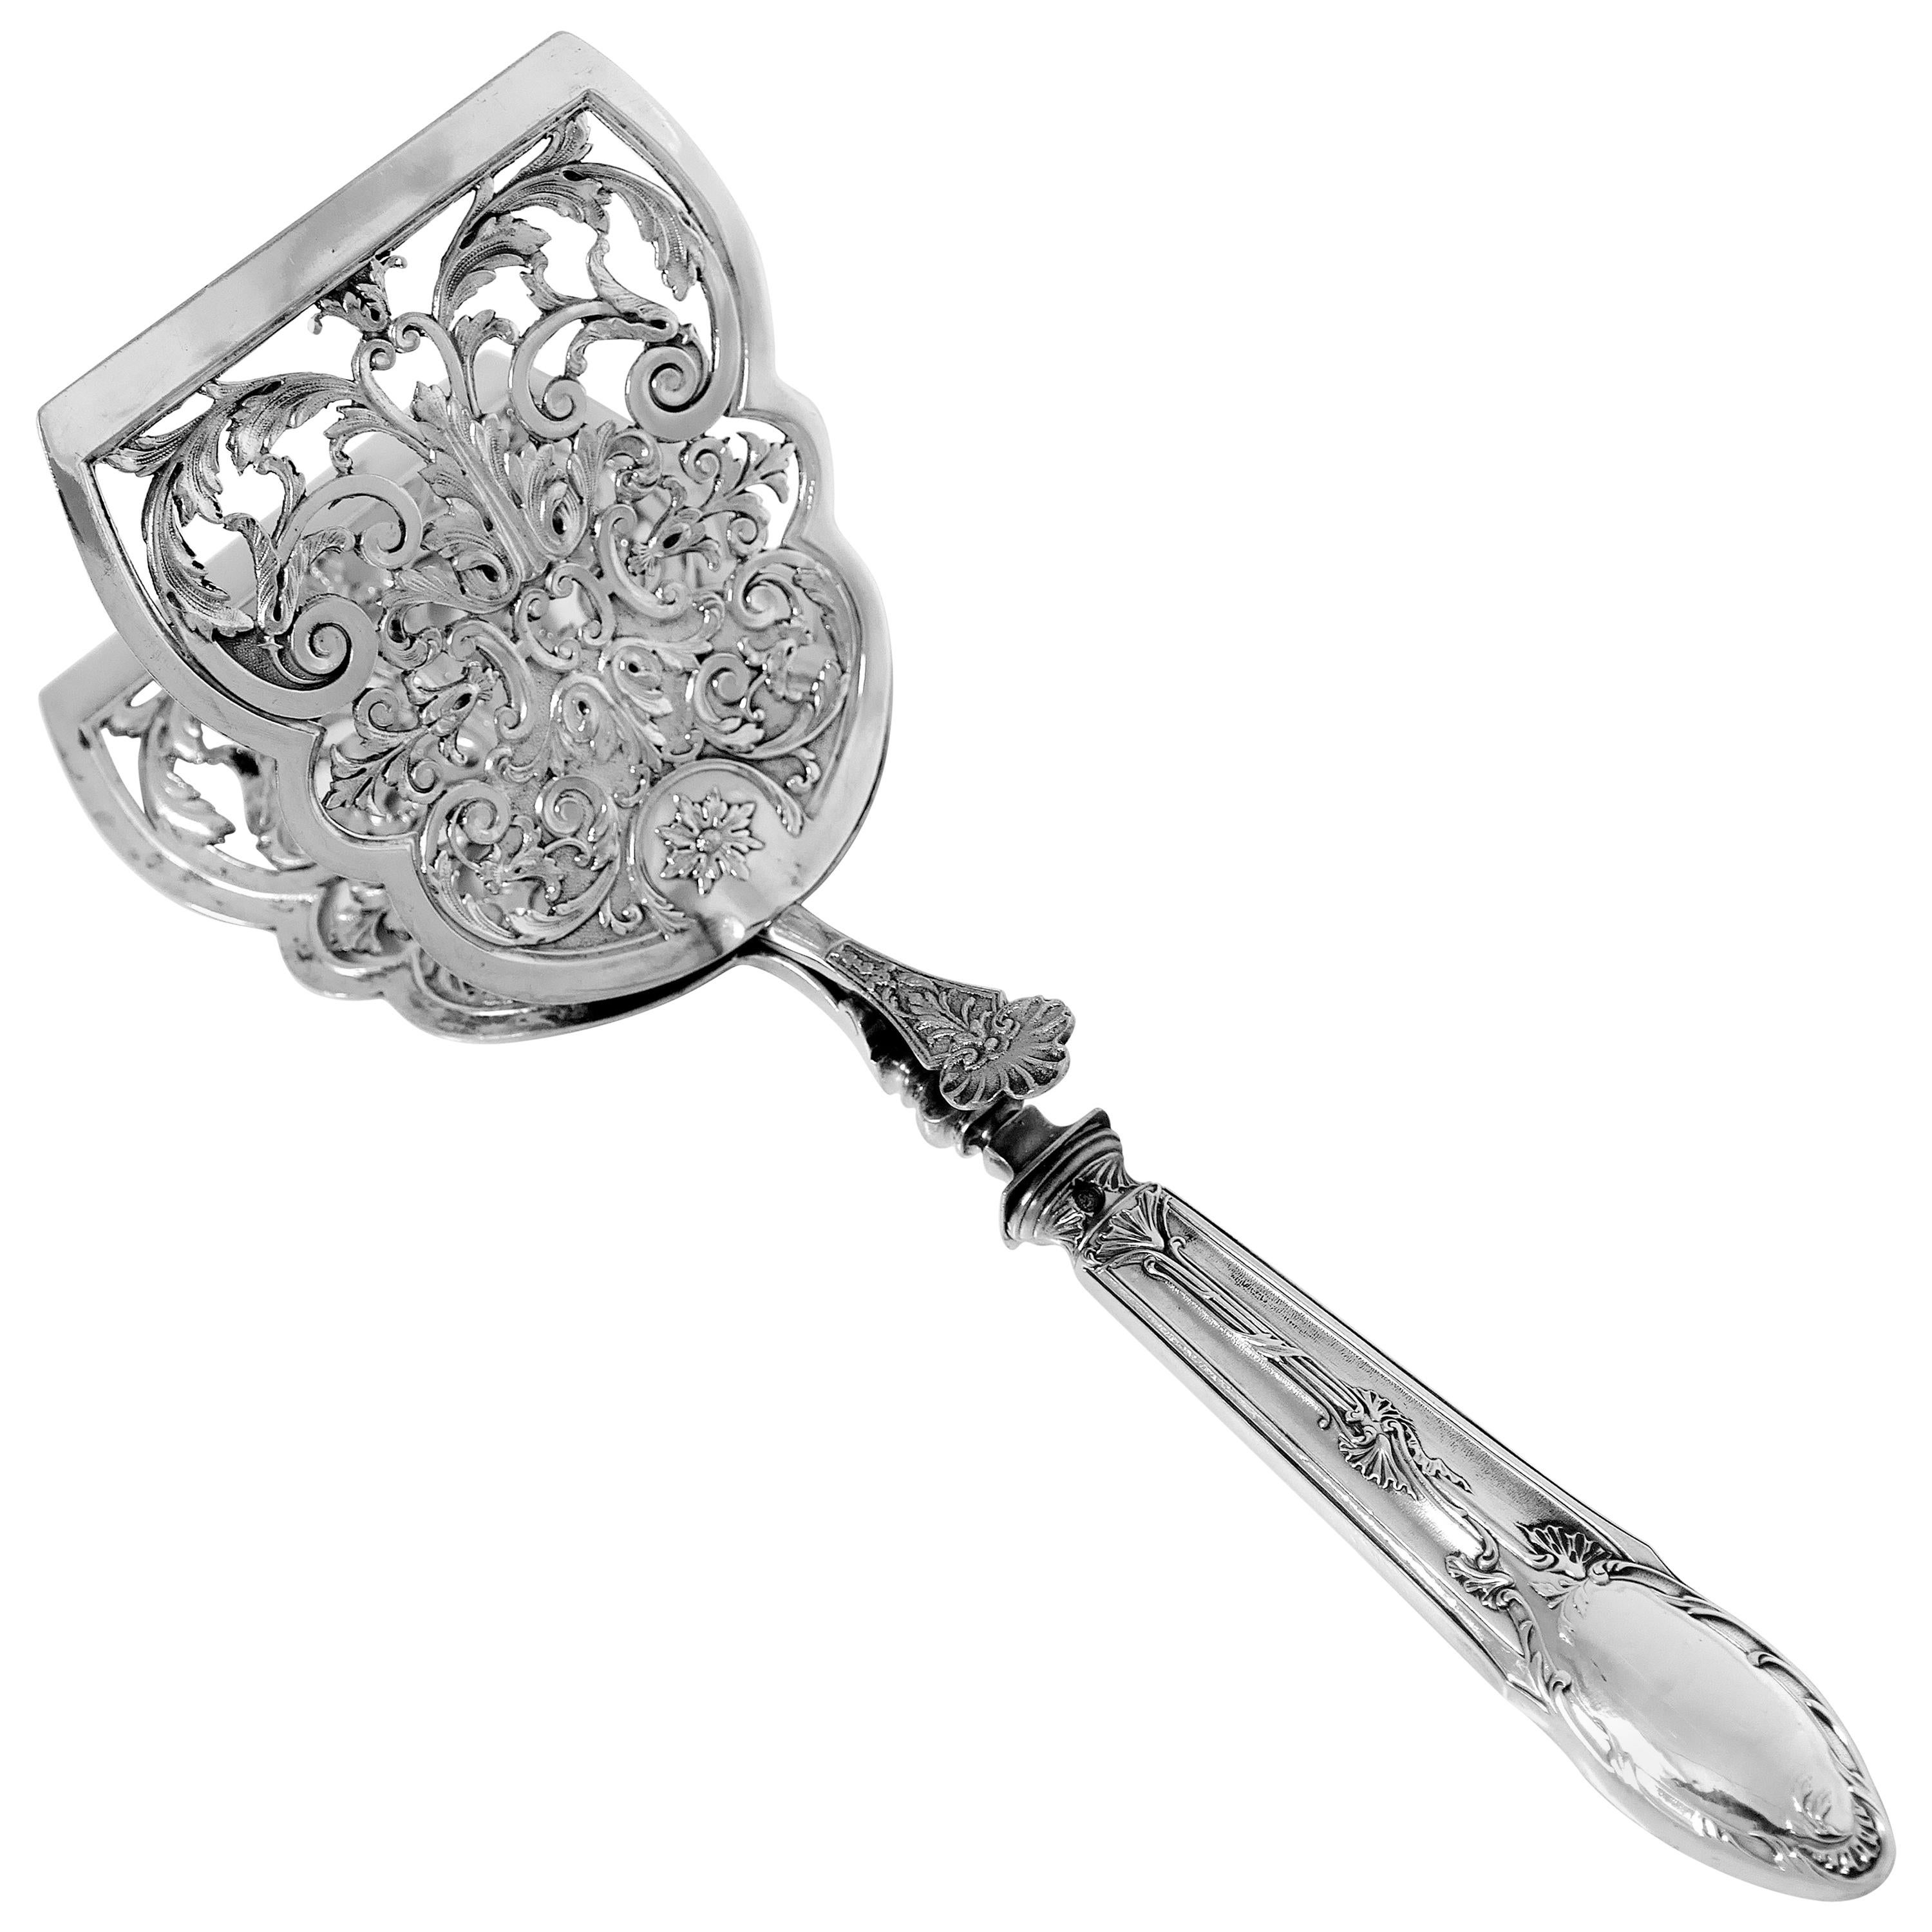 Deflon French Sterling Silver Asparagus Pastry Toast Server For Sale